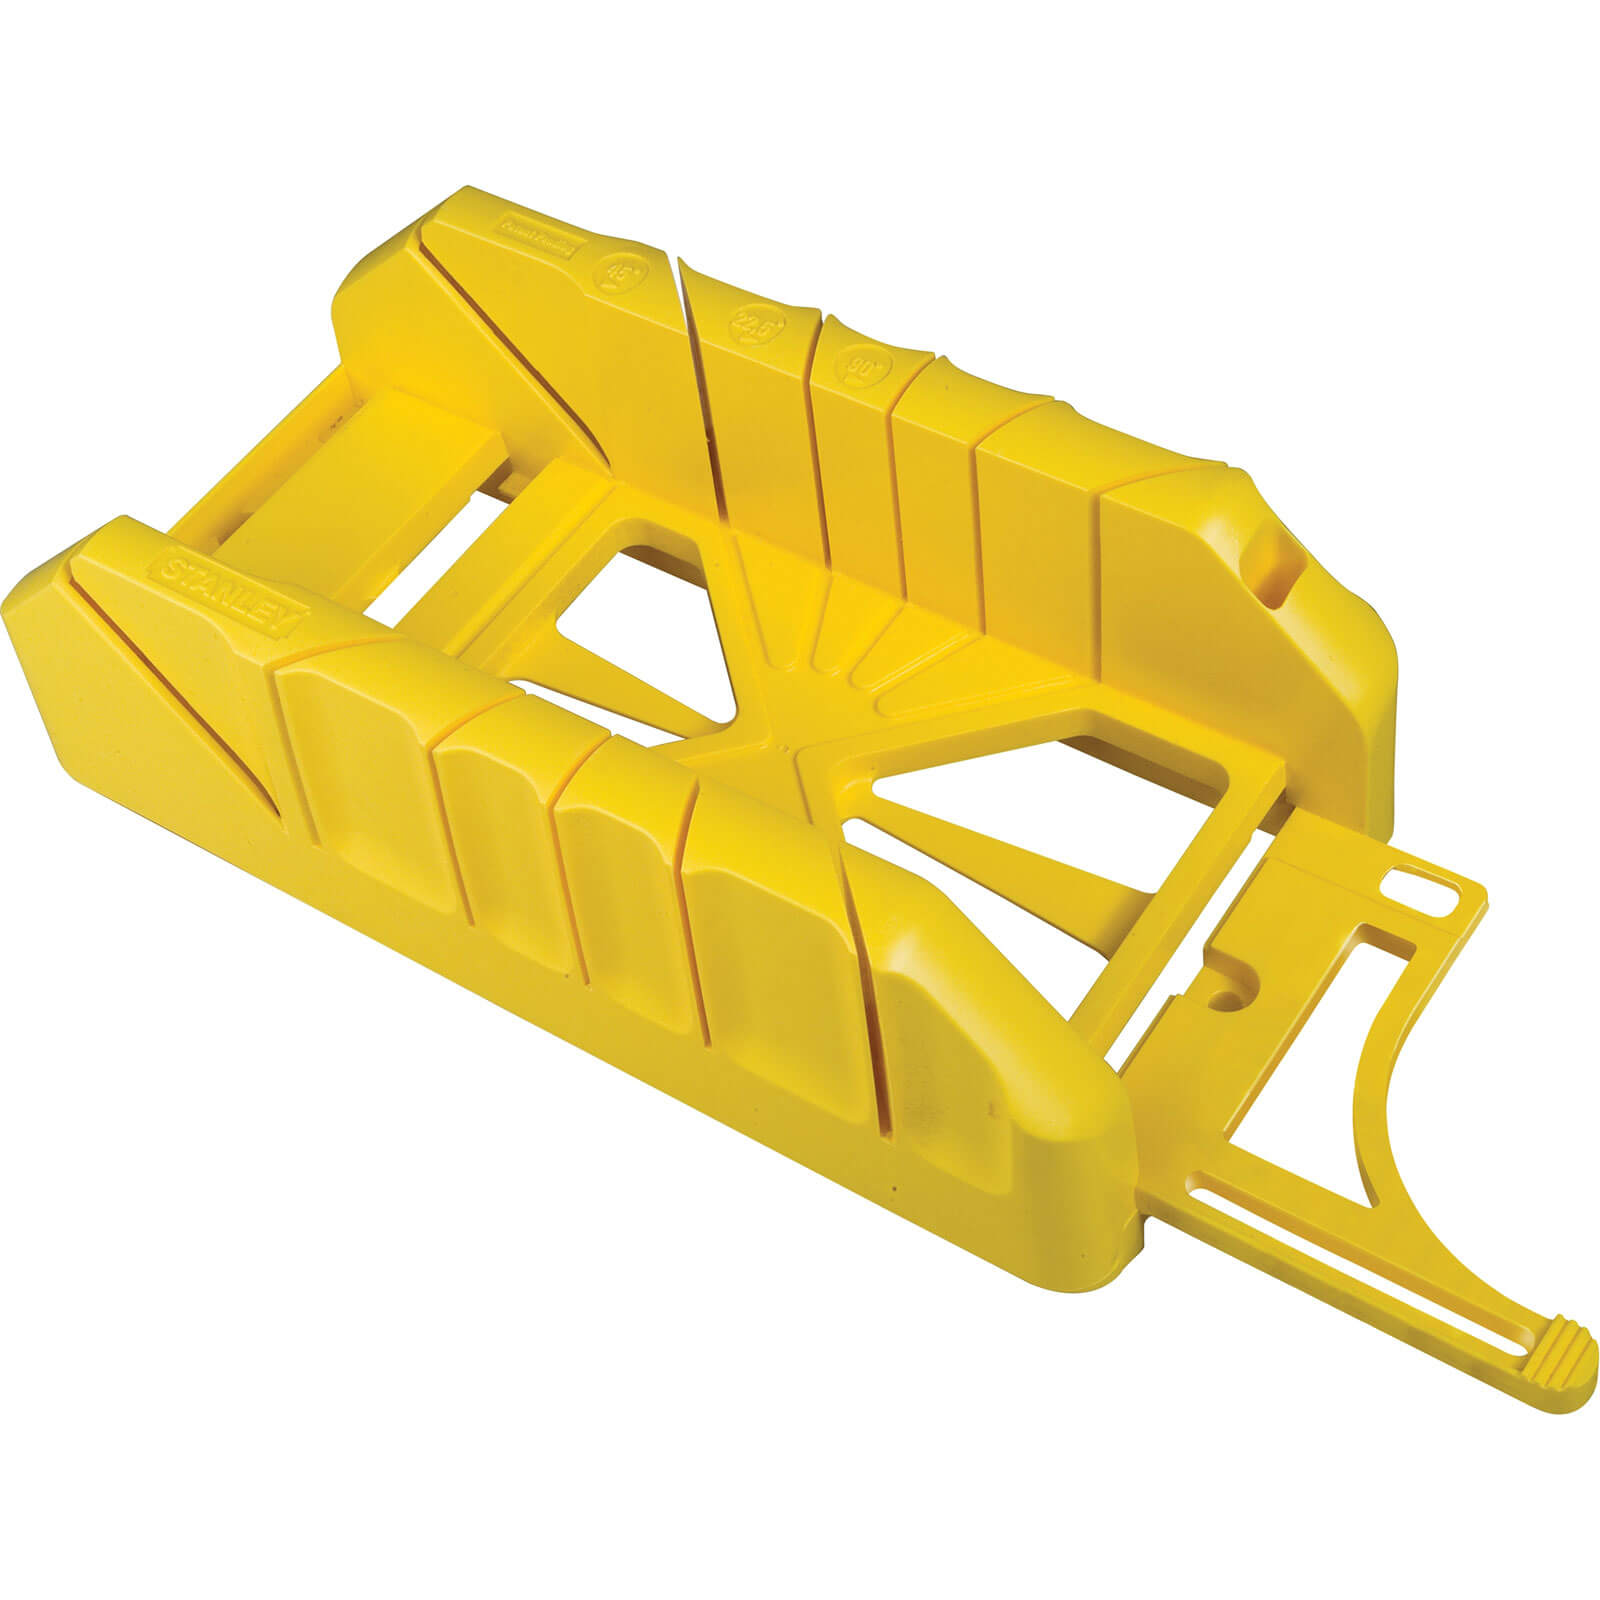 Image of Stanley Mitre Box 300mm